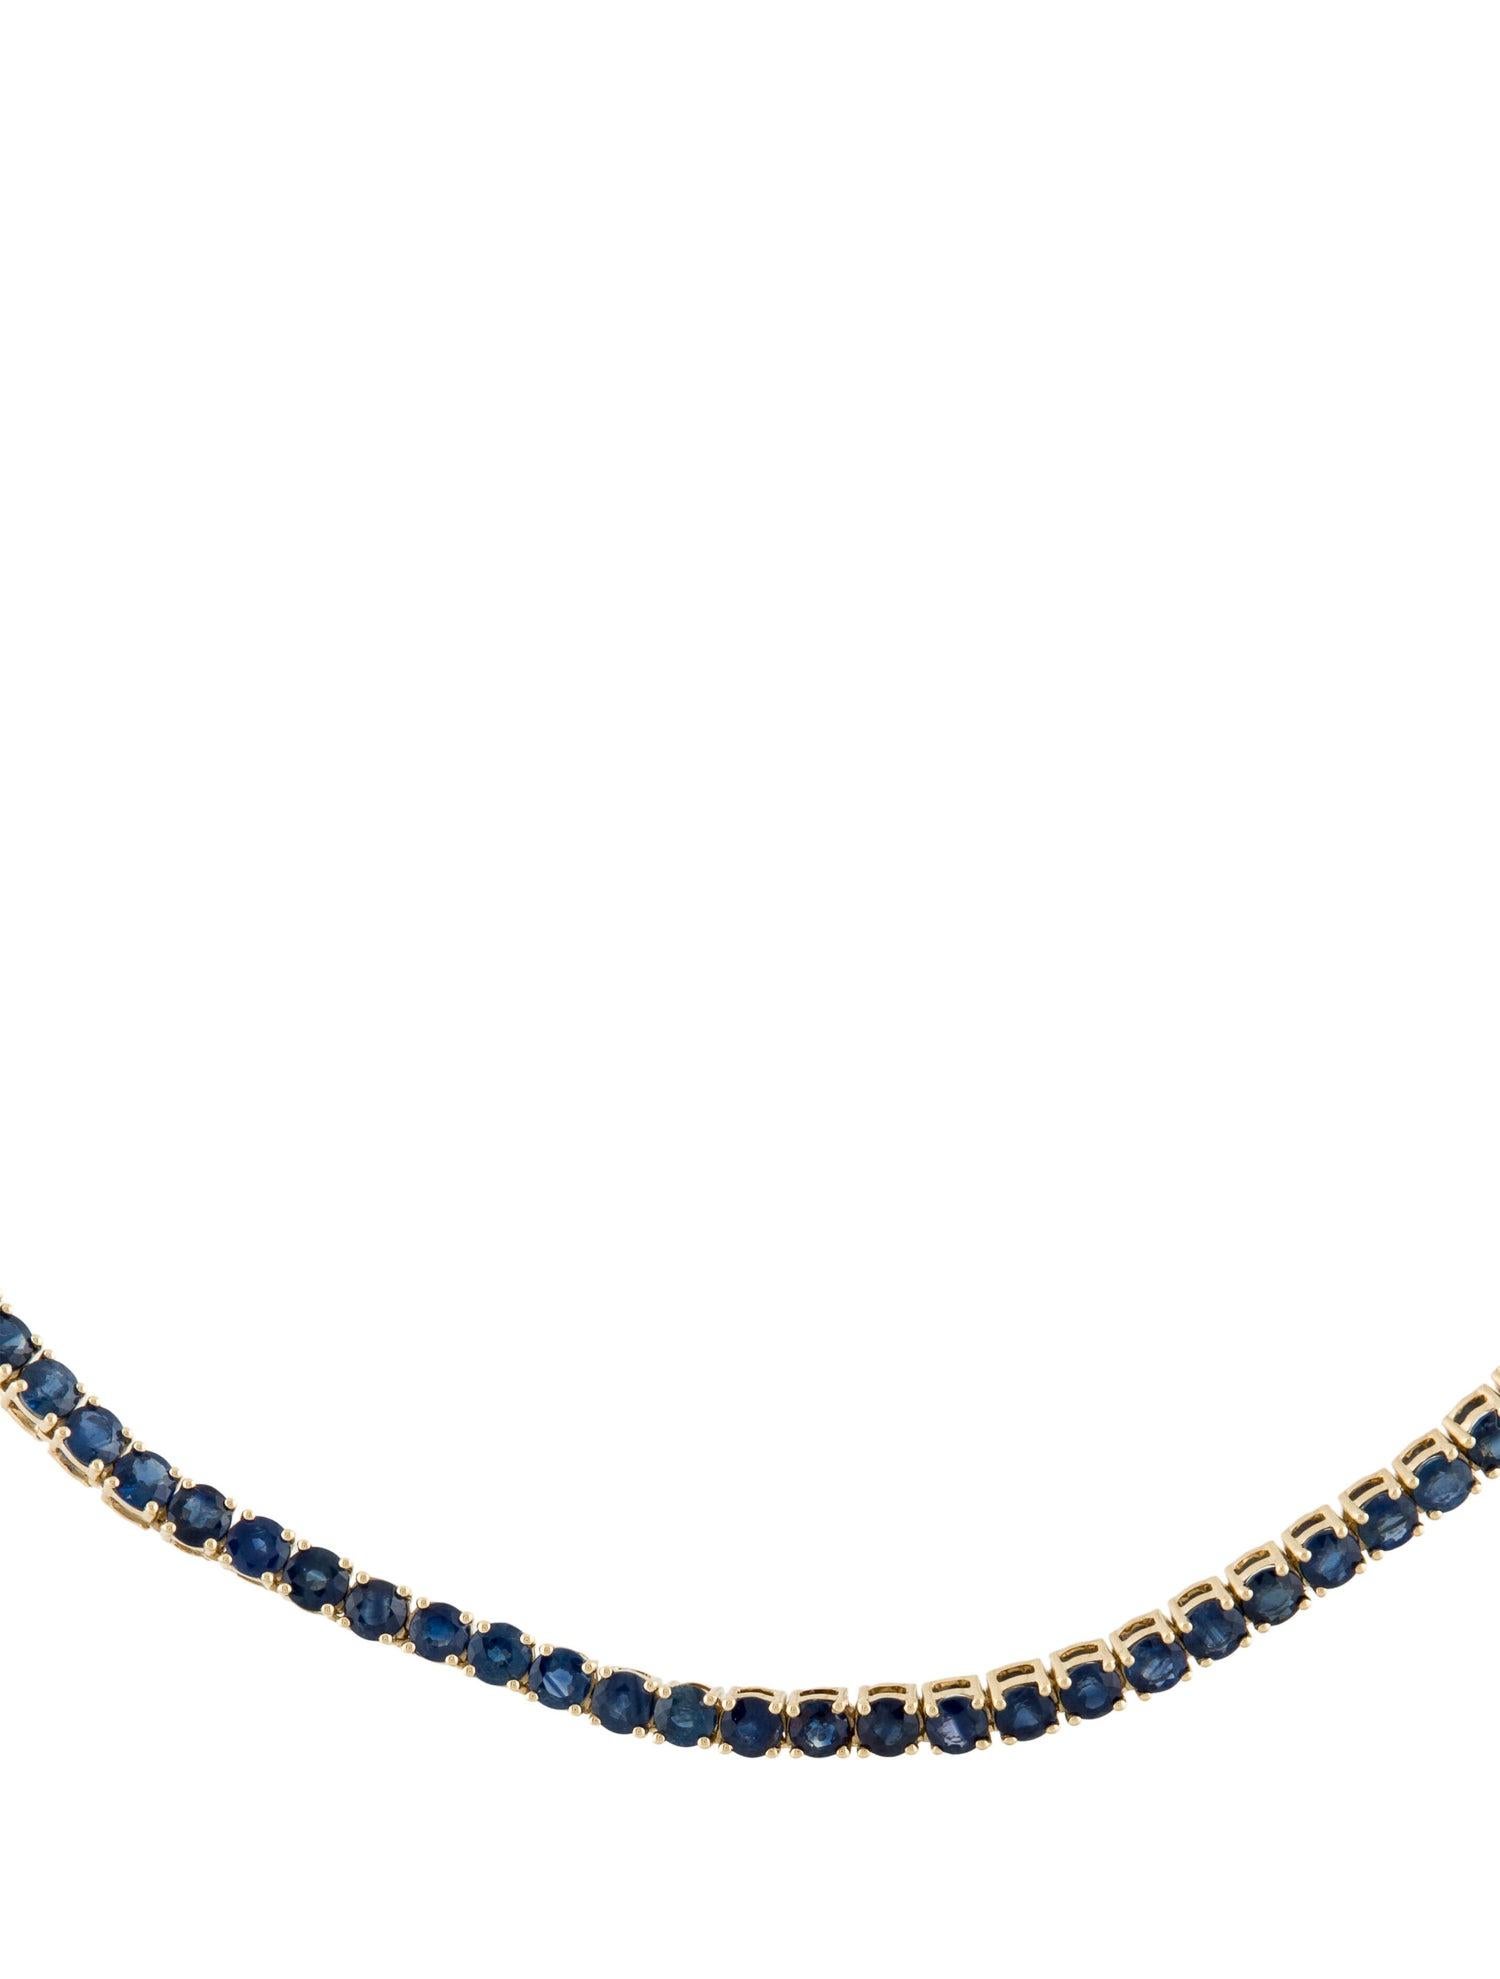 Women's or Men's 14K Sapphire Collar Necklace 10.71ctw - Exquisite Statement Jewelry for Elegance For Sale